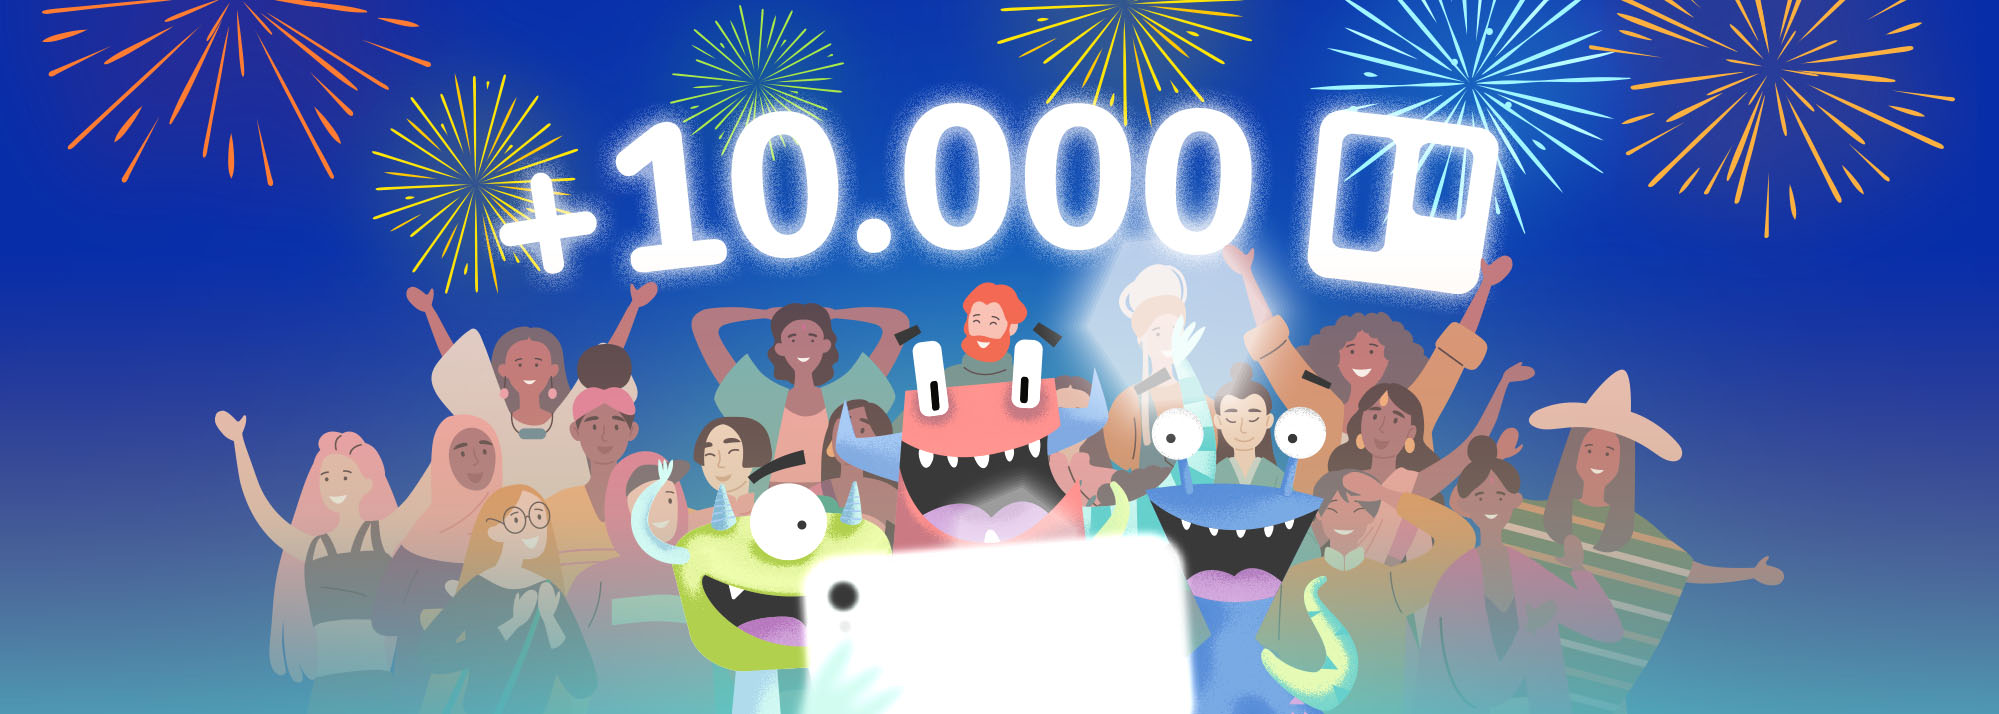 Crmble monsters celebrating +10000 Trello boards milestone reached and taking a selfie in front of a in fornt of a diverse and multicultural crowd